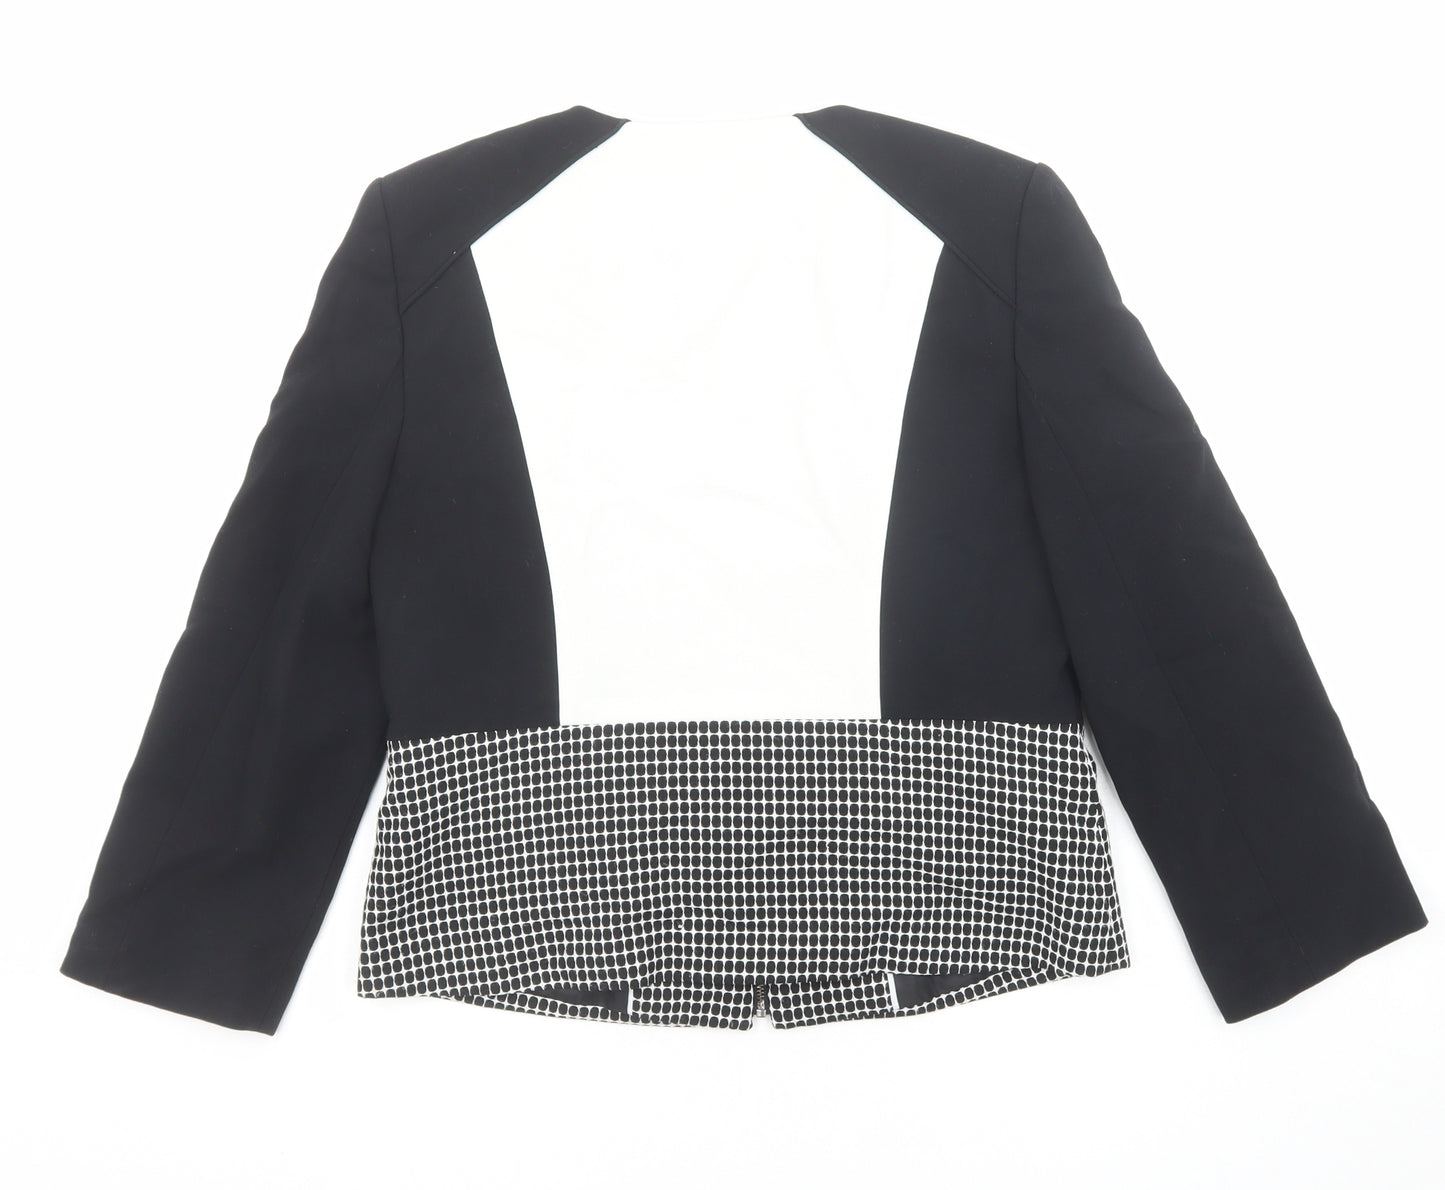 Marks and Spencer Womens Black Geometric Jacket Size 10 Zip